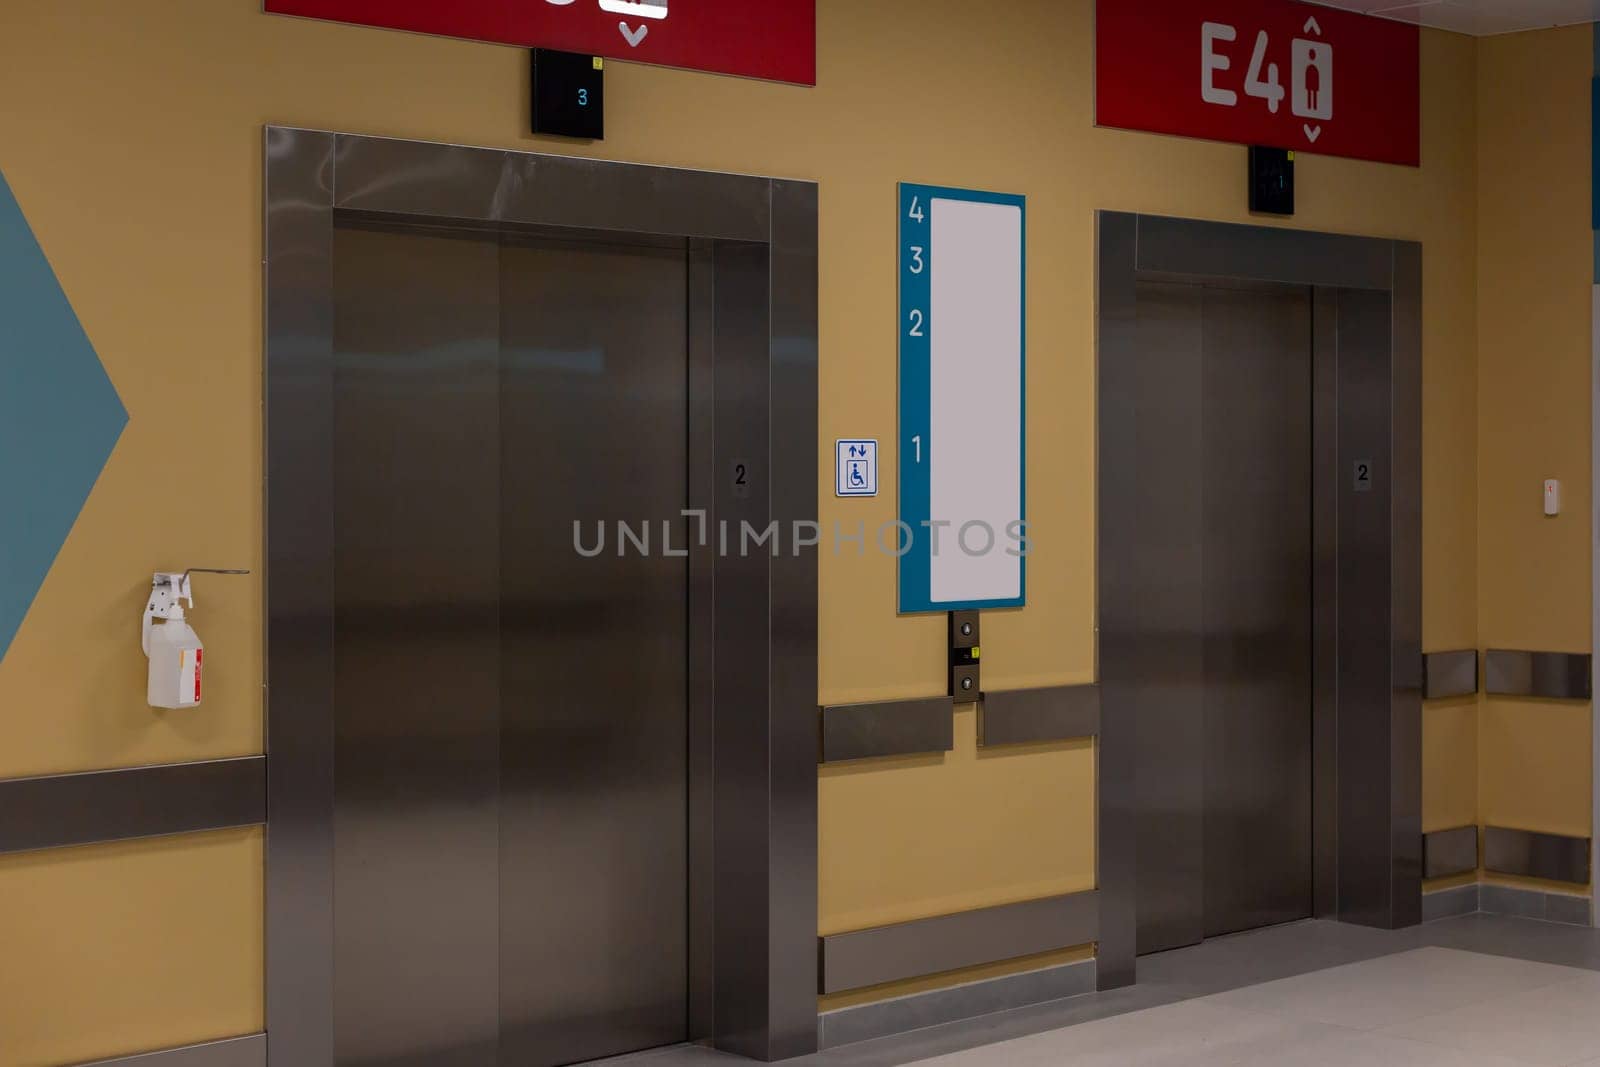 Modern elevator doors with red directional signs in a corridor.